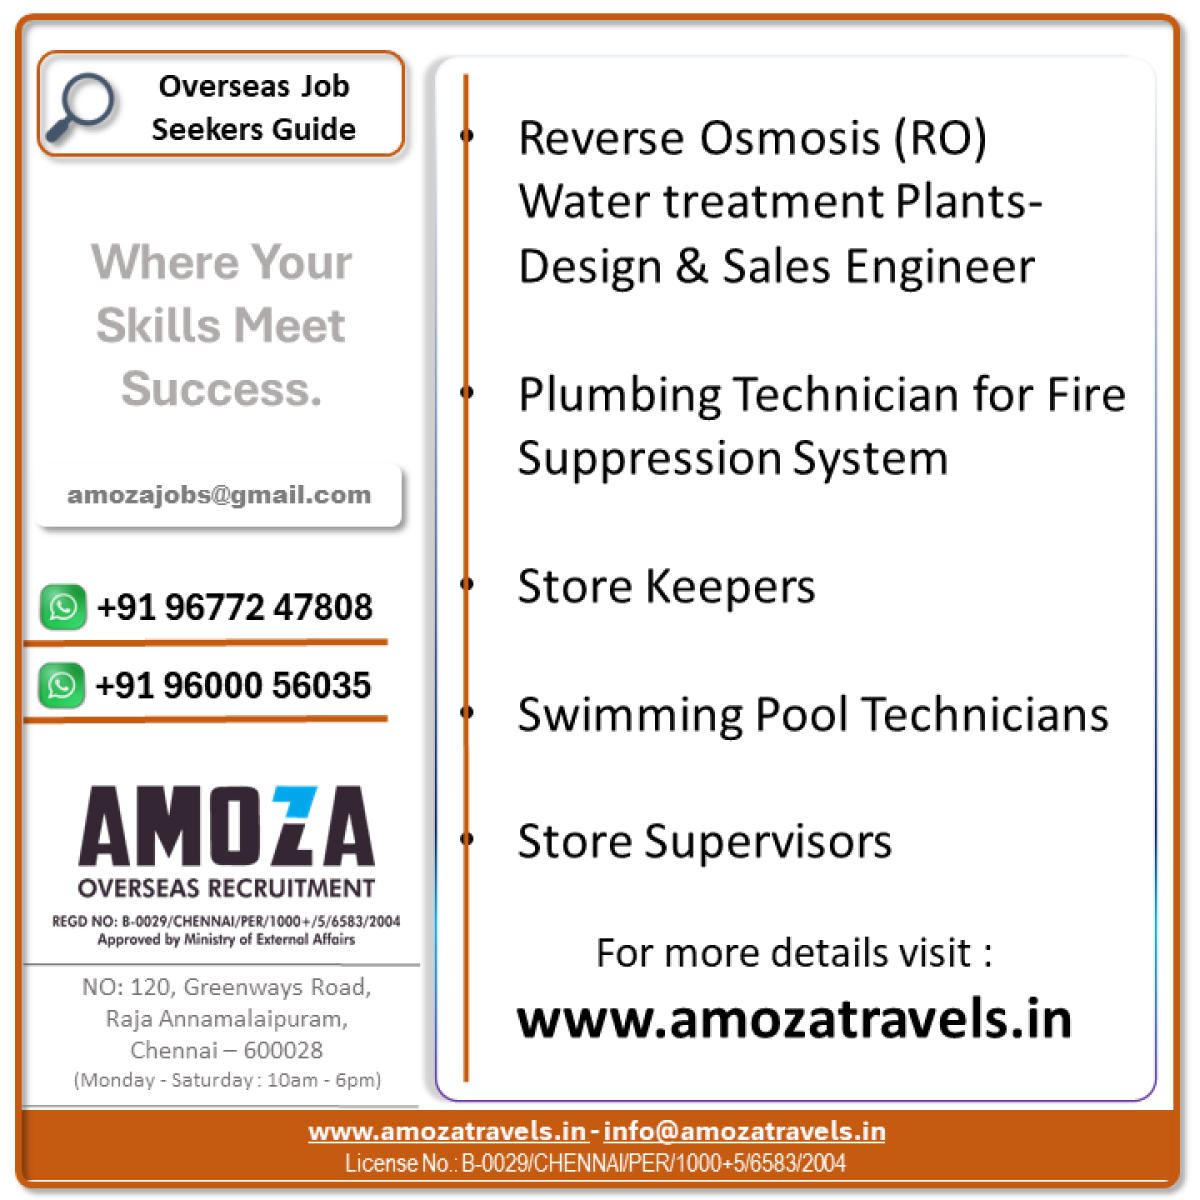 Reverse Osmosis (RO) Water treatment Plants- Design & Sales Engineer --|-- Plumbing Technician for Fire Suppression System --|-- Store Keepers --|-- Swimming Pool Technicians --|-- Store Supervisor